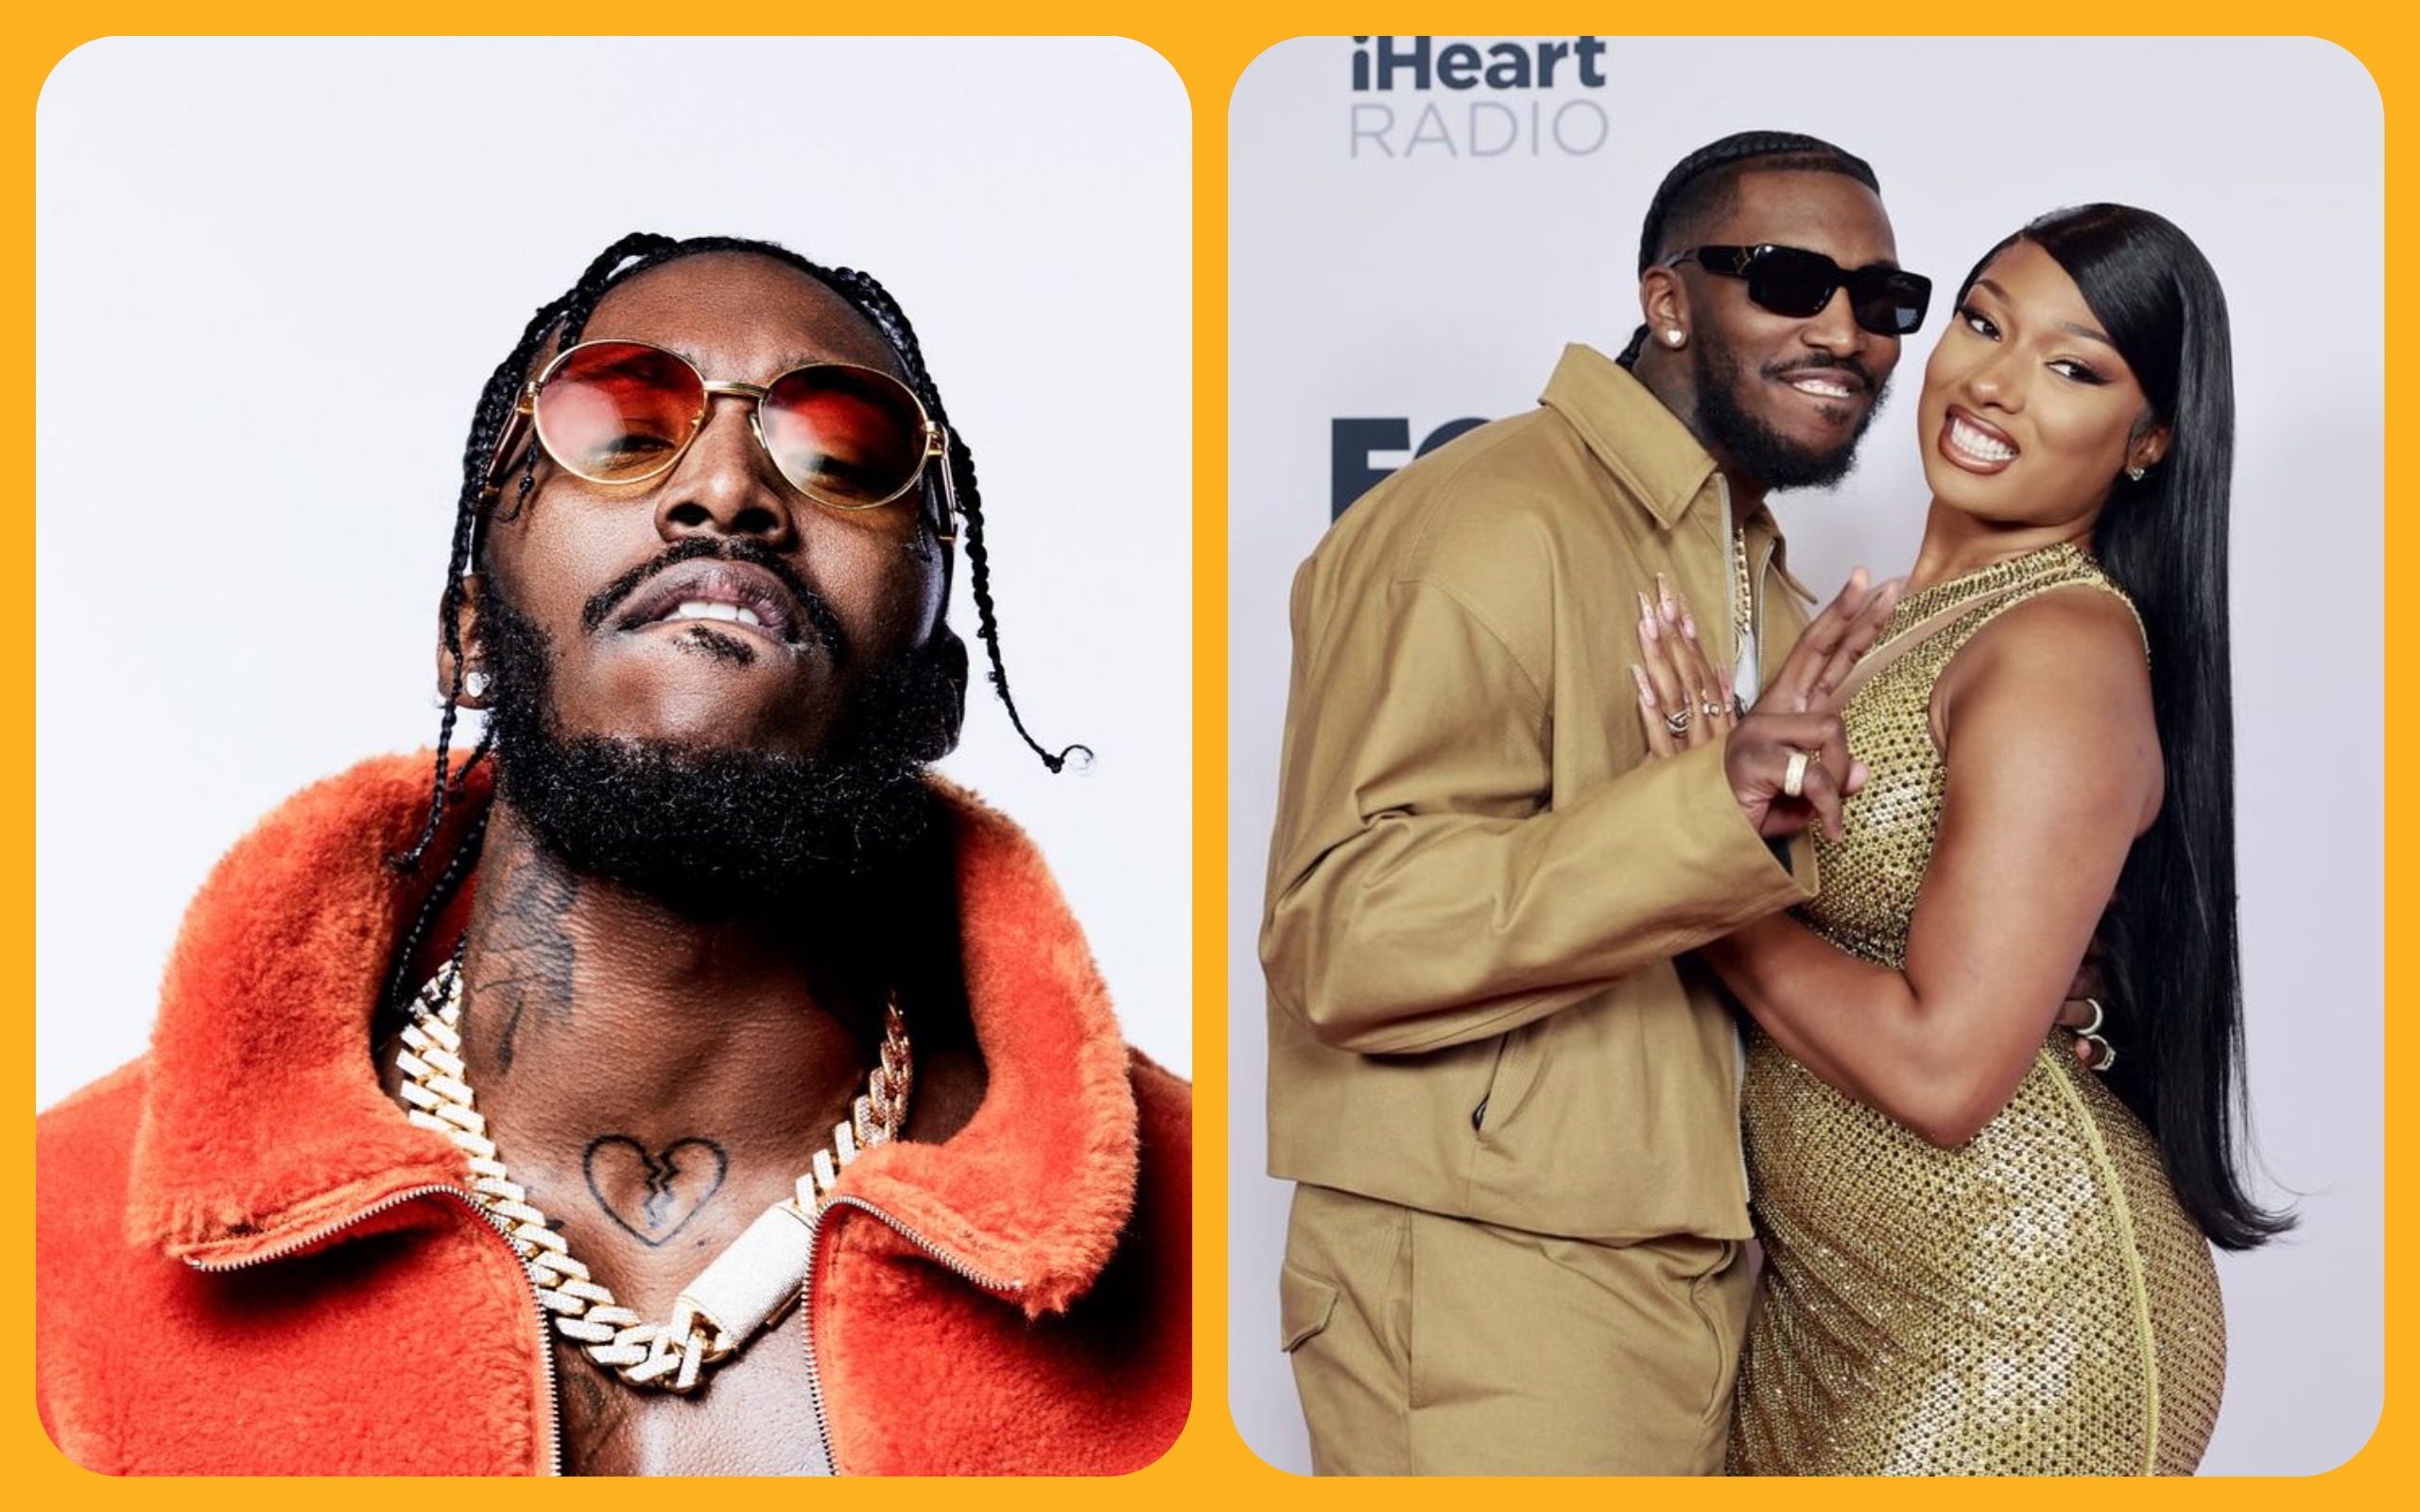 Pardison Fontaine Accuses Megan Thee Stallion of Cheating on New Song 